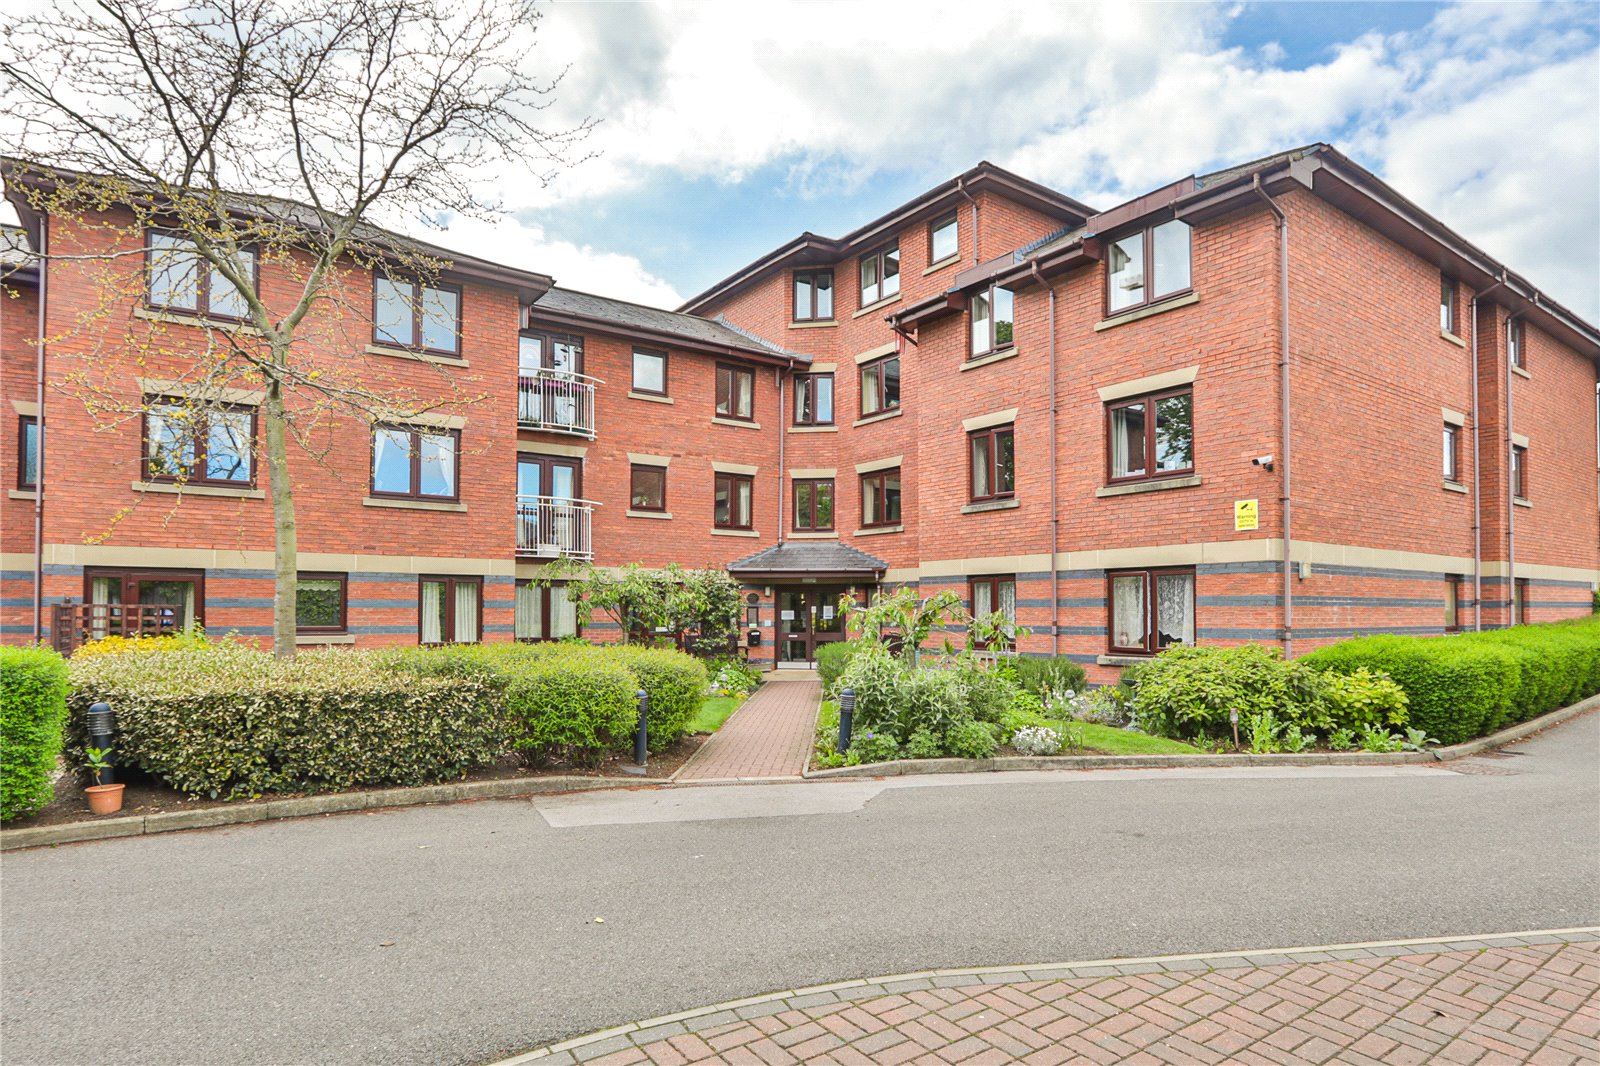 1 bed apartment for sale in Goulding Court, Beverley, HU17